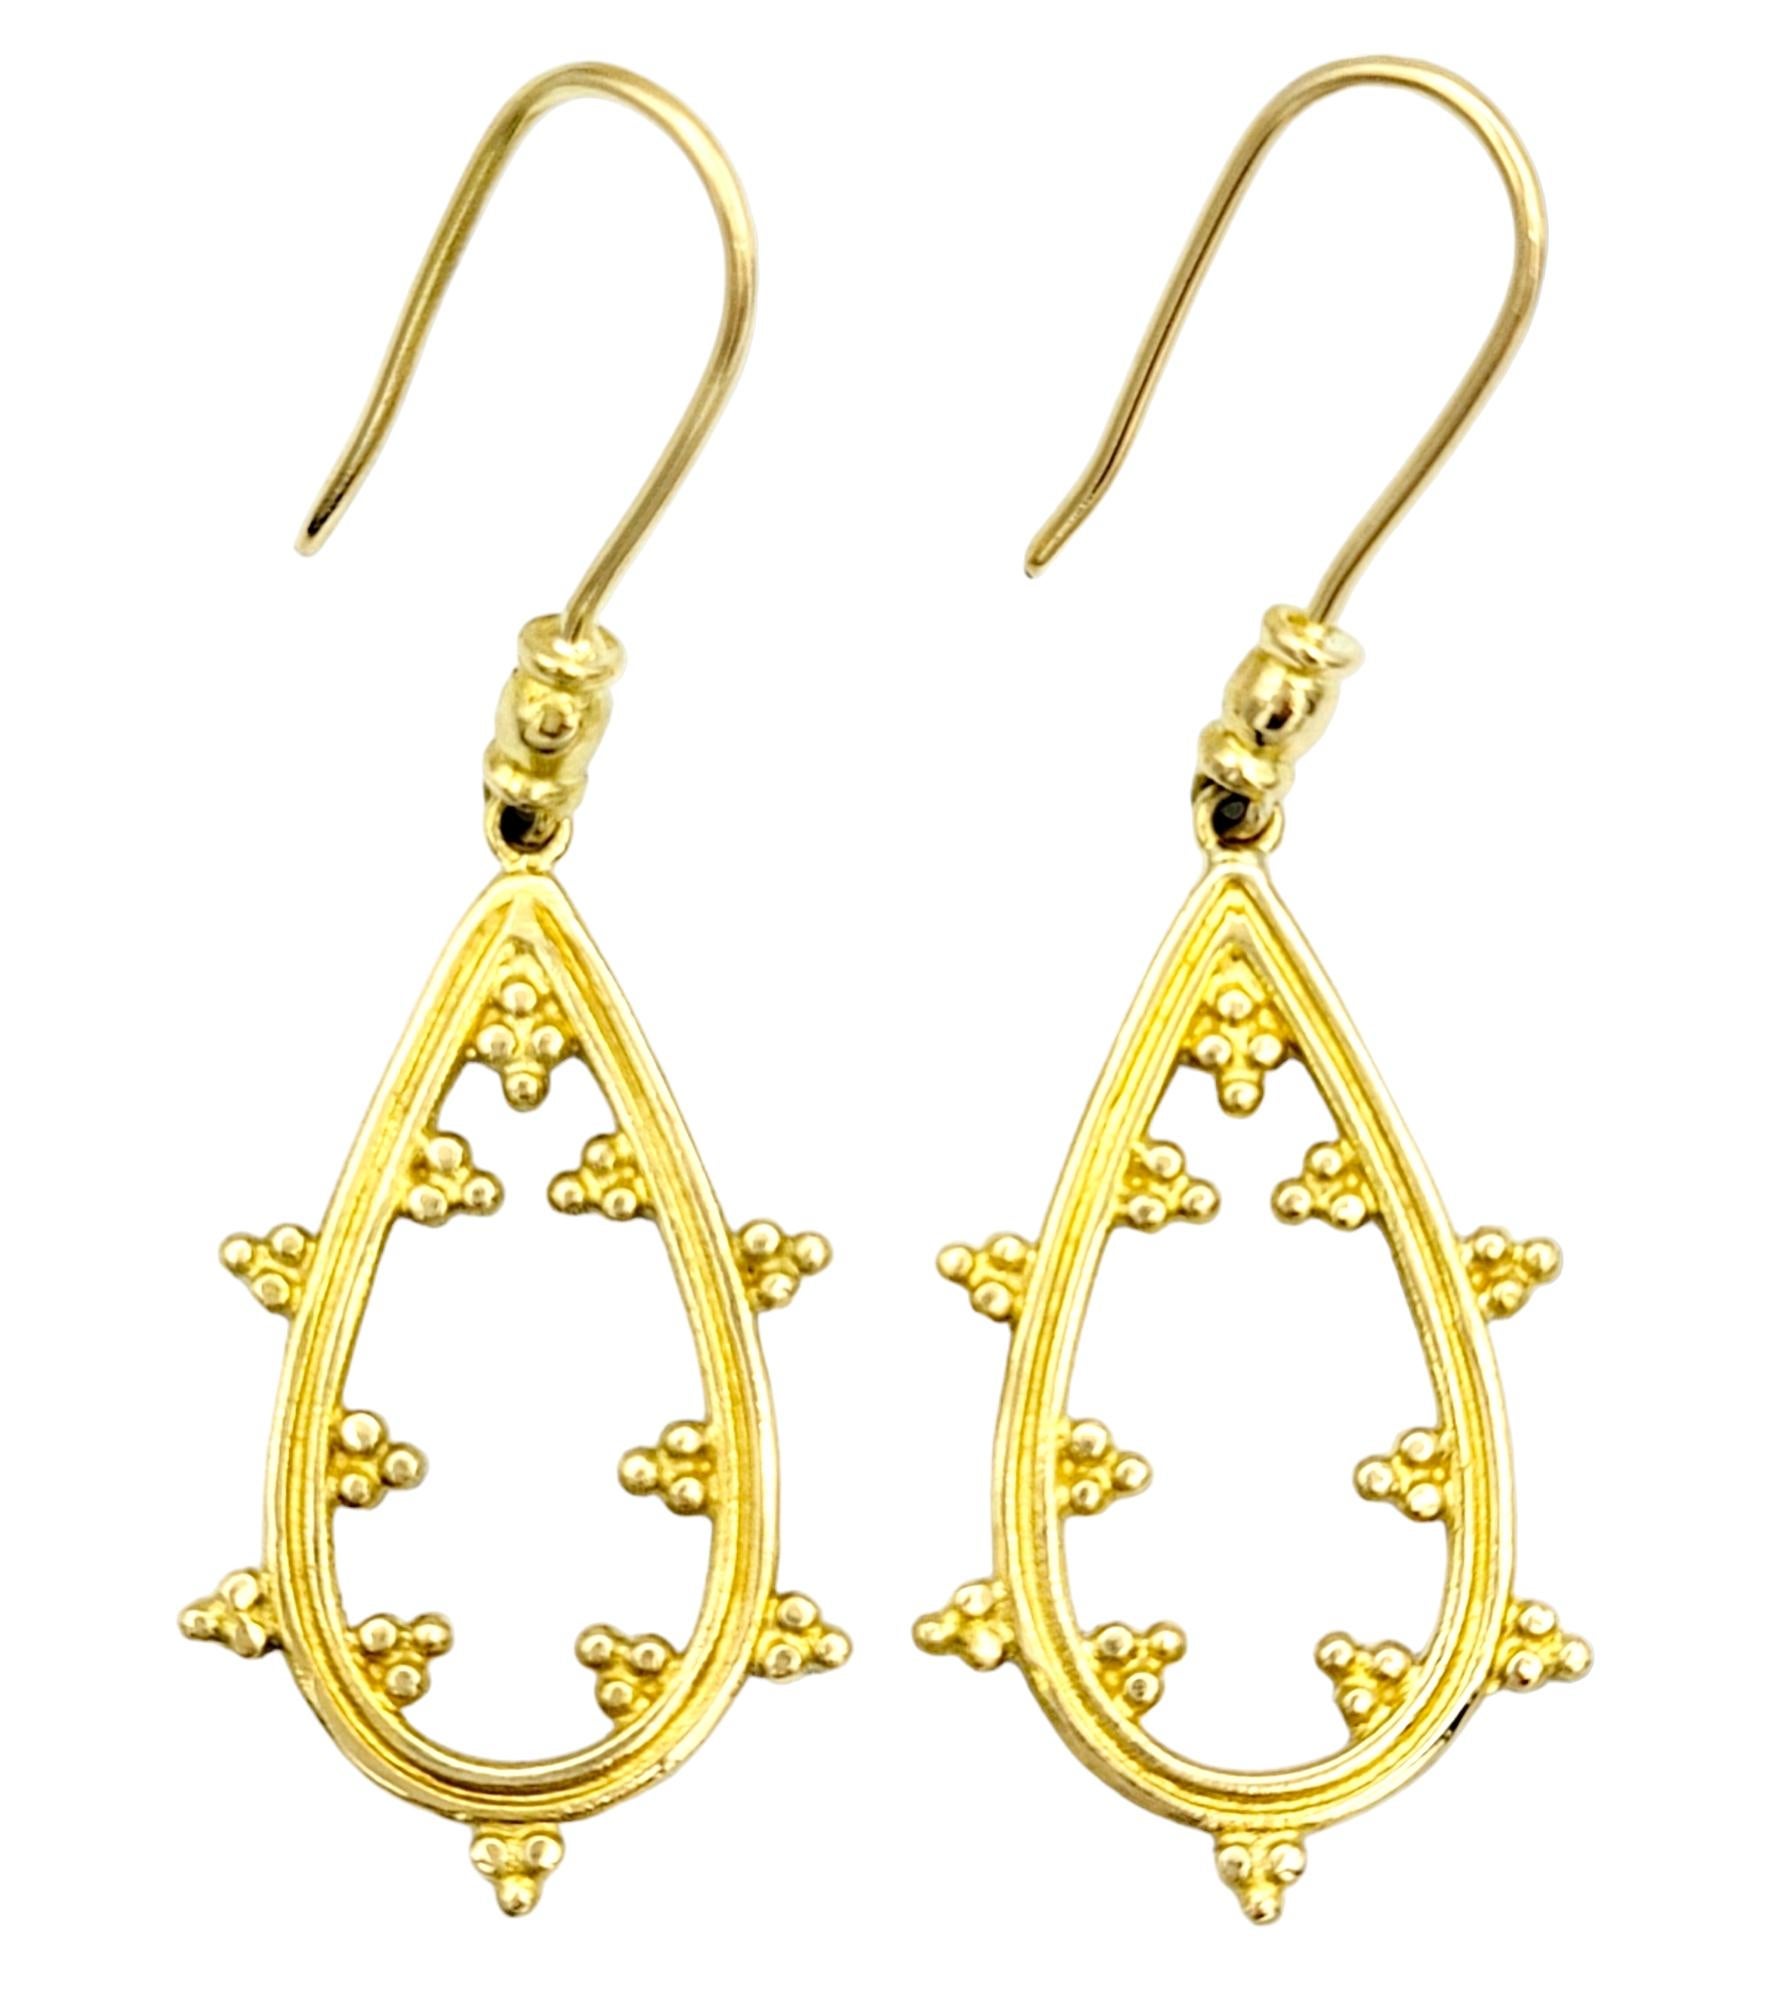 These pear-shaped dangle earrings, crafted in beautiful 18 karat yellow gold, exude a timeless elegance that will elevate your jewelry collection. 

These earrings are made up of entirely yellow gold, molded into a beautiful open pear shape that